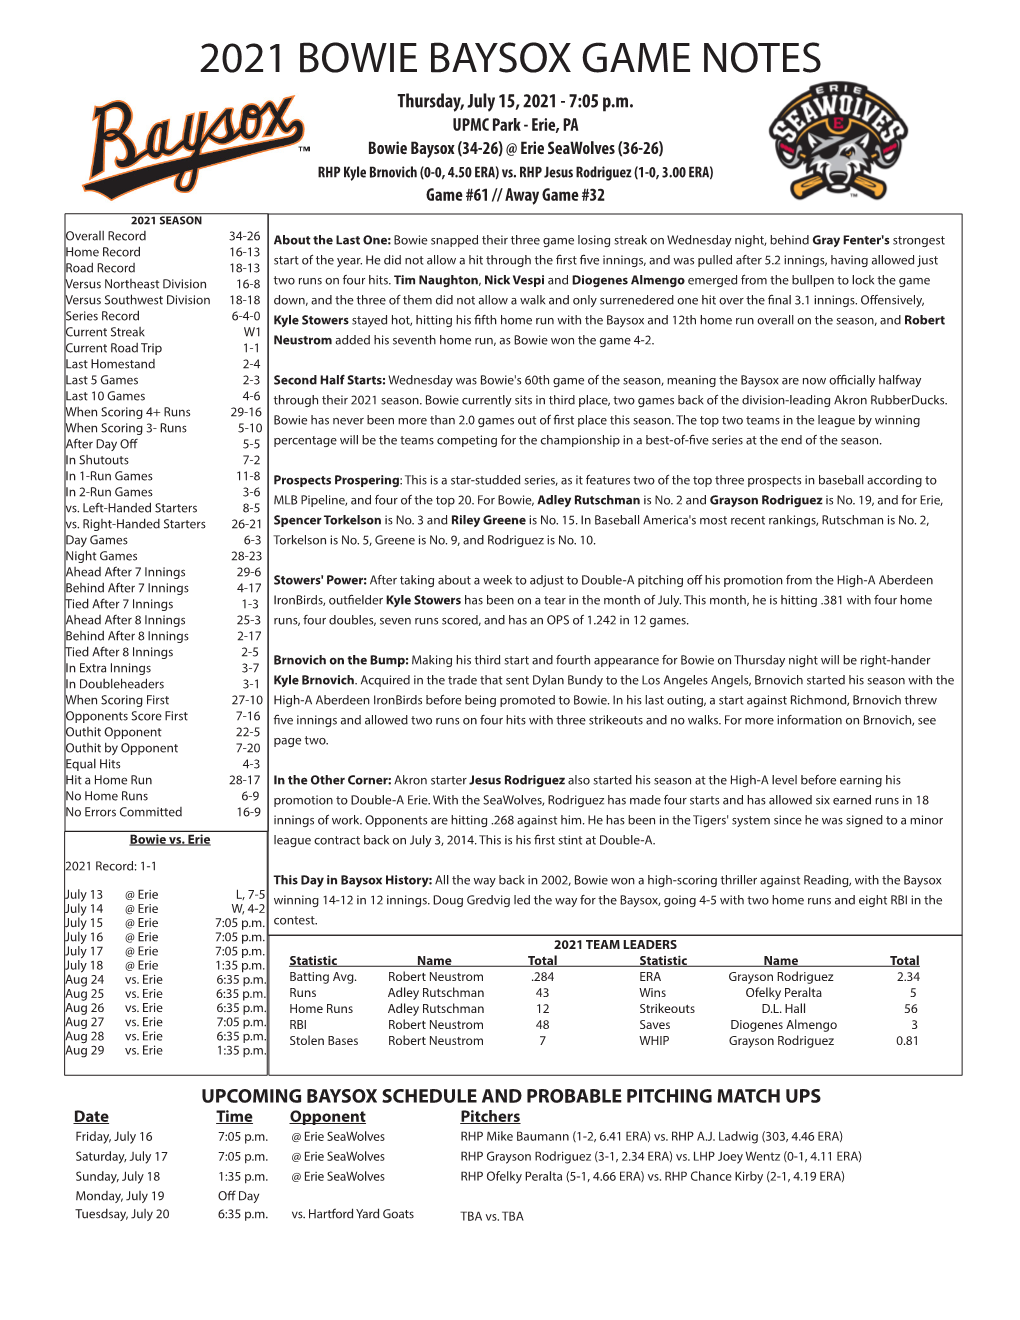 2021 BOWIE BAYSOX GAME NOTES Thursday, July 15, 2021 - 7:05 P.M